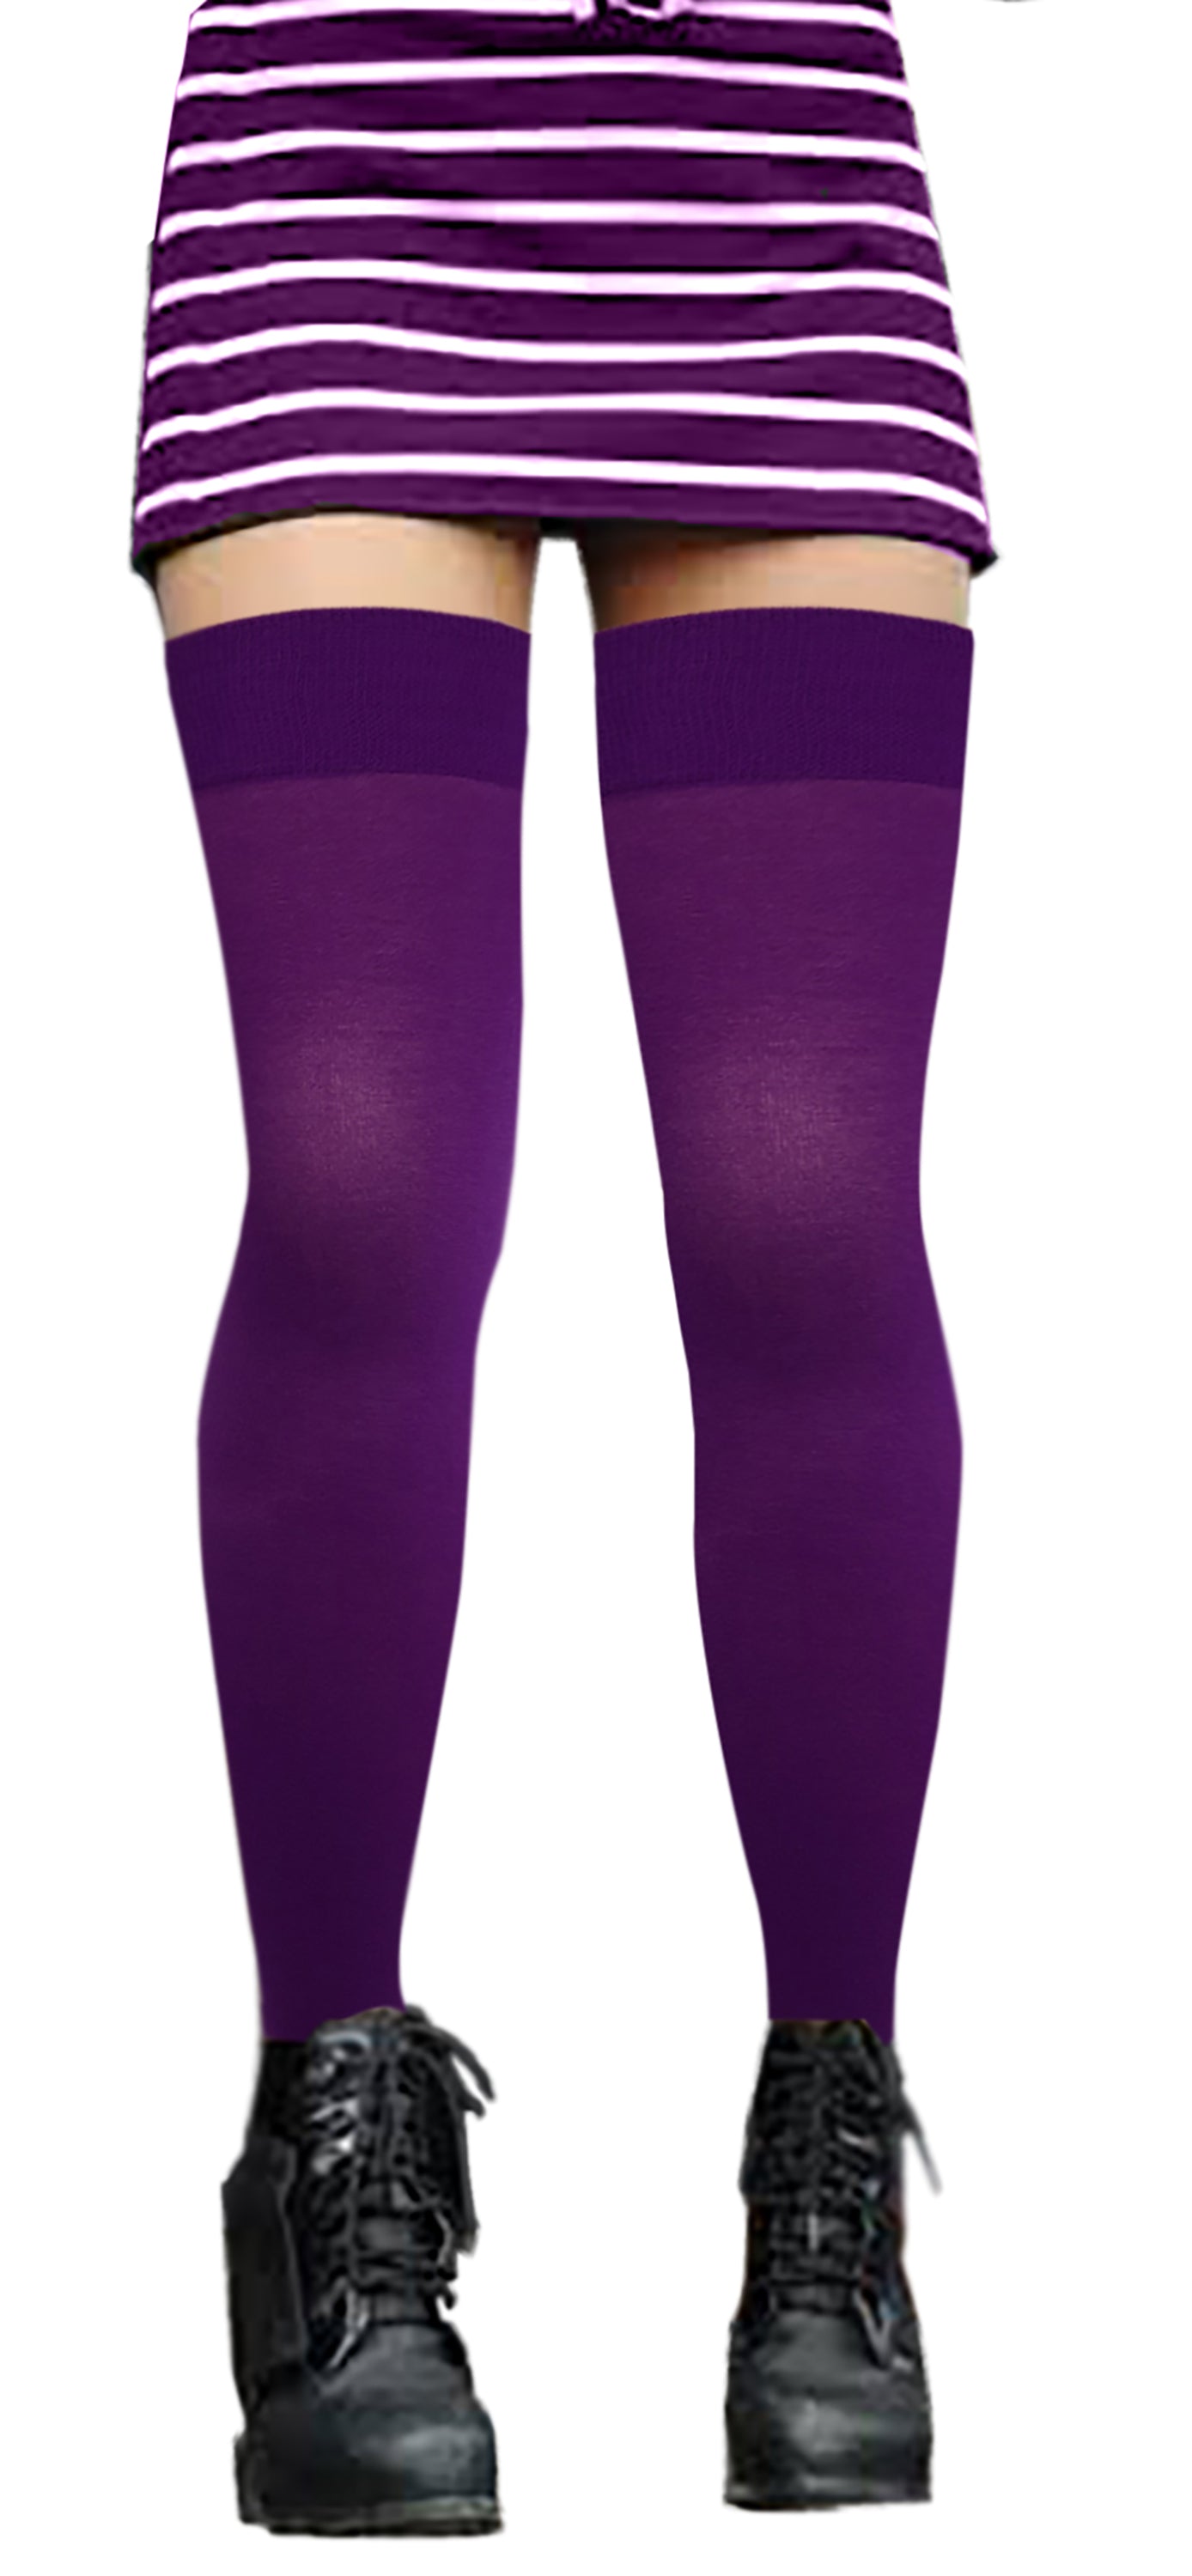 Thigh High Trouser Socks | Opaque Solid Colors | Women